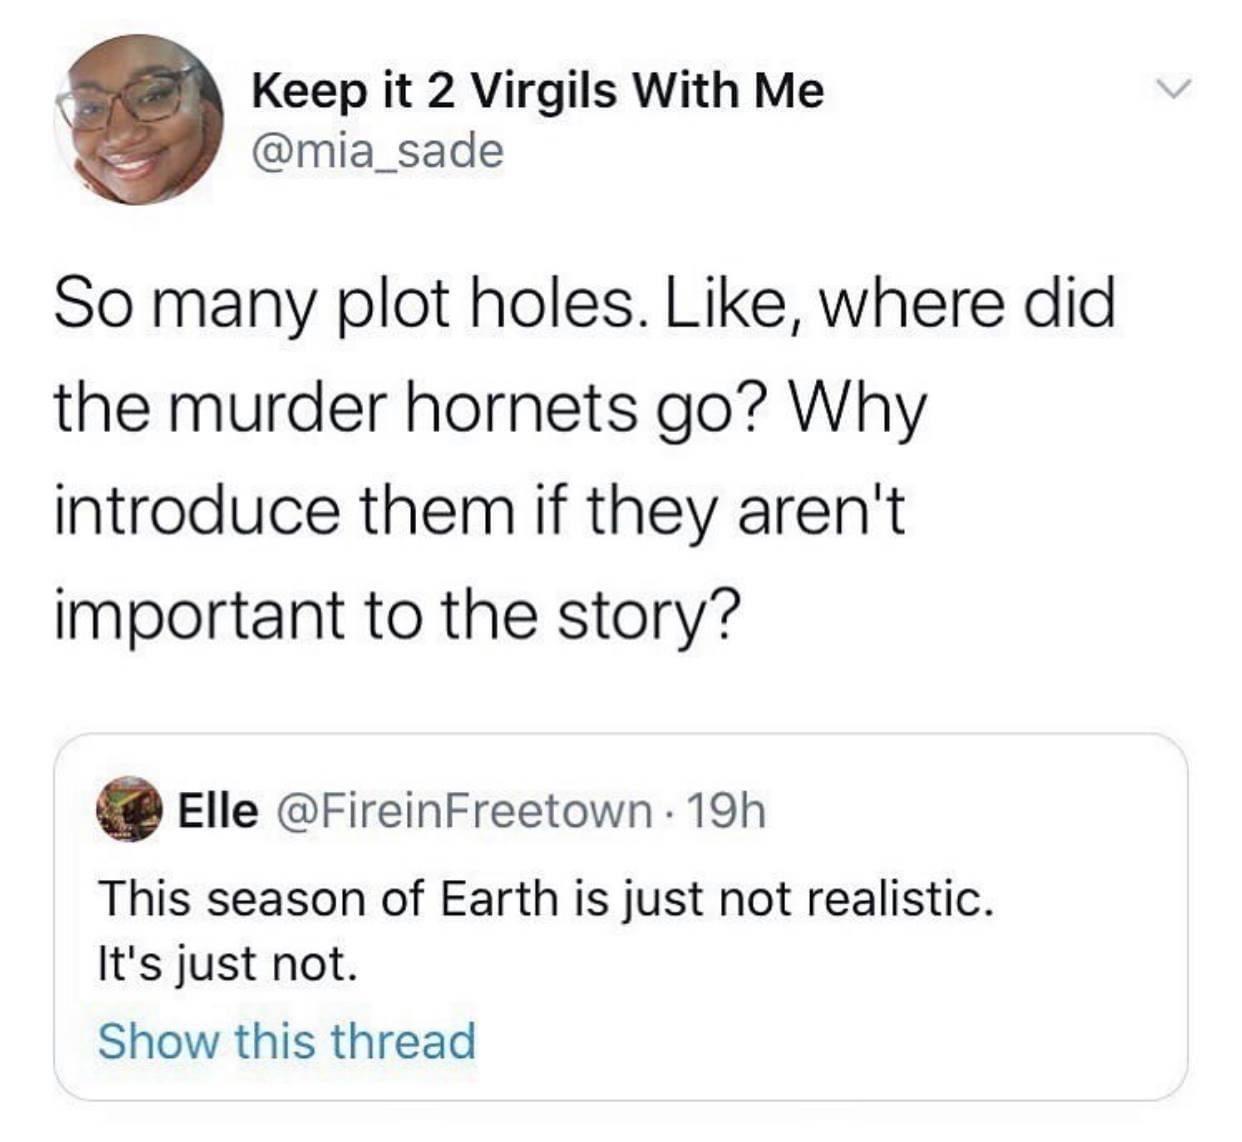 ll take the death penalty - Keep it 2 Virgils With Me So many plot holes. , where did the murder hornets go? Why introduce them if they aren't important to the story? Elle 19h This season of Earth is just not realistic. It's just not. Show this thread